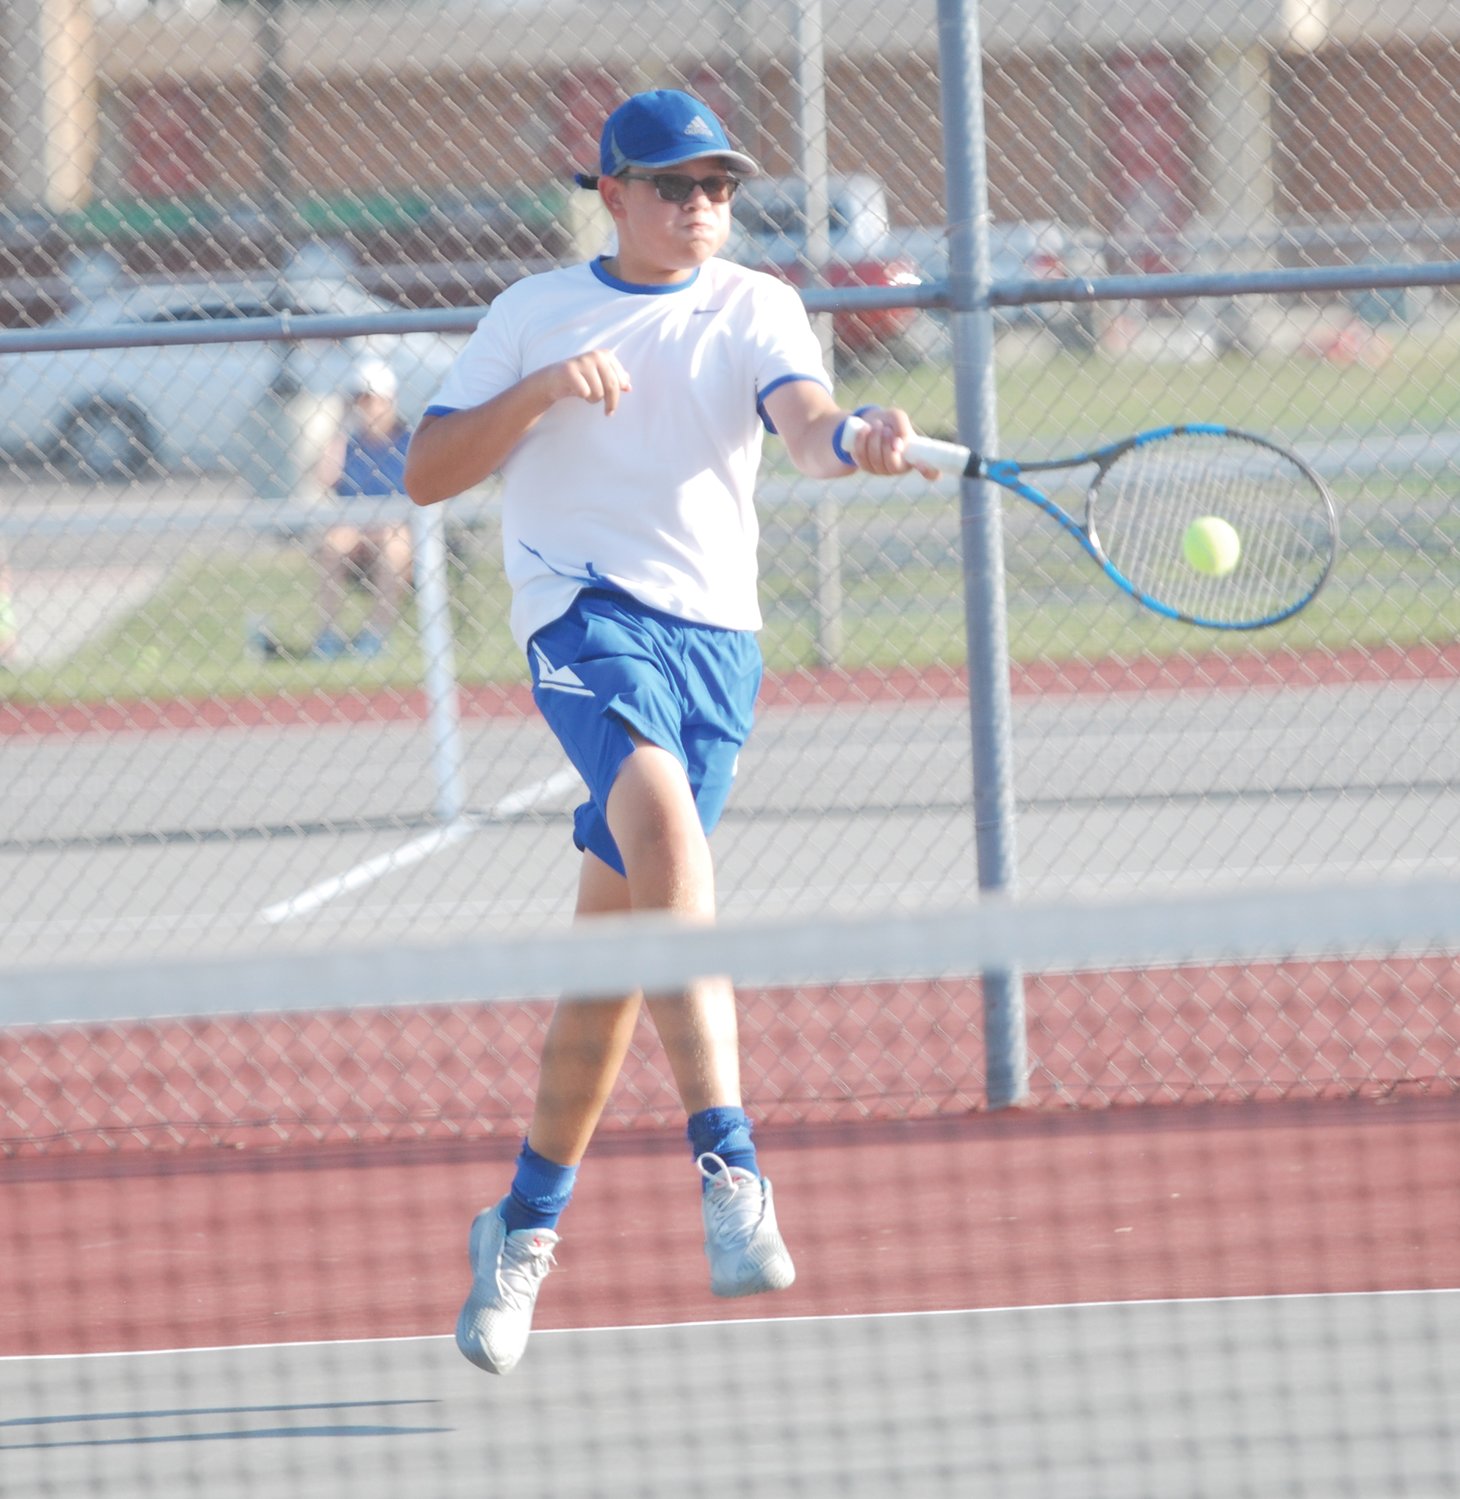 James Murphy picked up the Athenians' lone win on Thursday at No. 3 singles over Luke Watson.